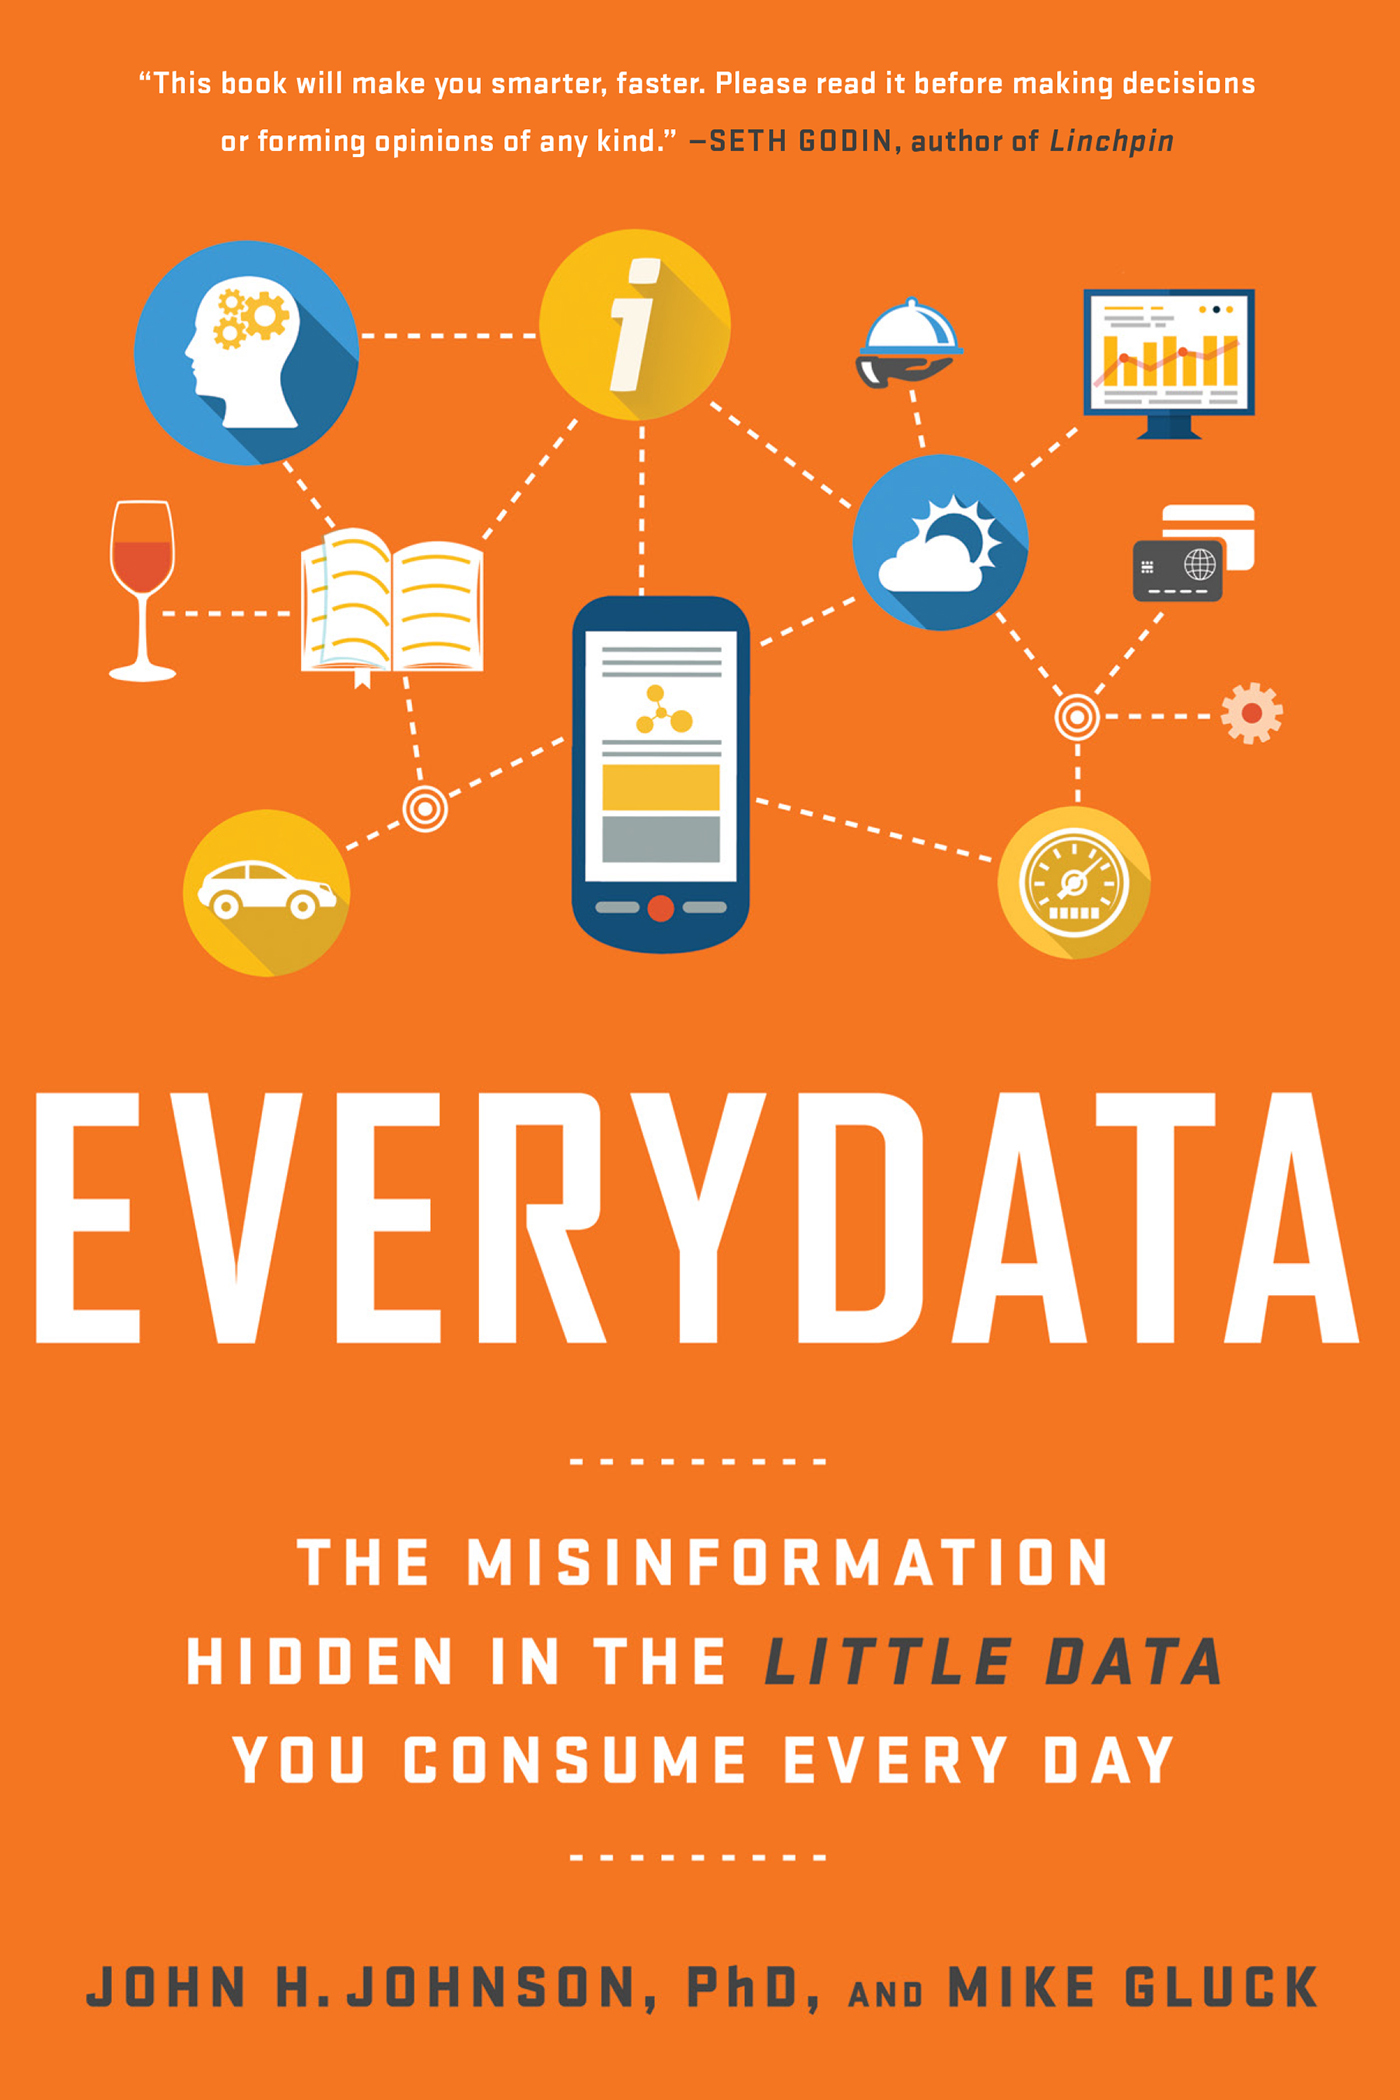 This image is the cover for the book Everydata: The Misinformation Hidden in the Little Data You Consume Every Day